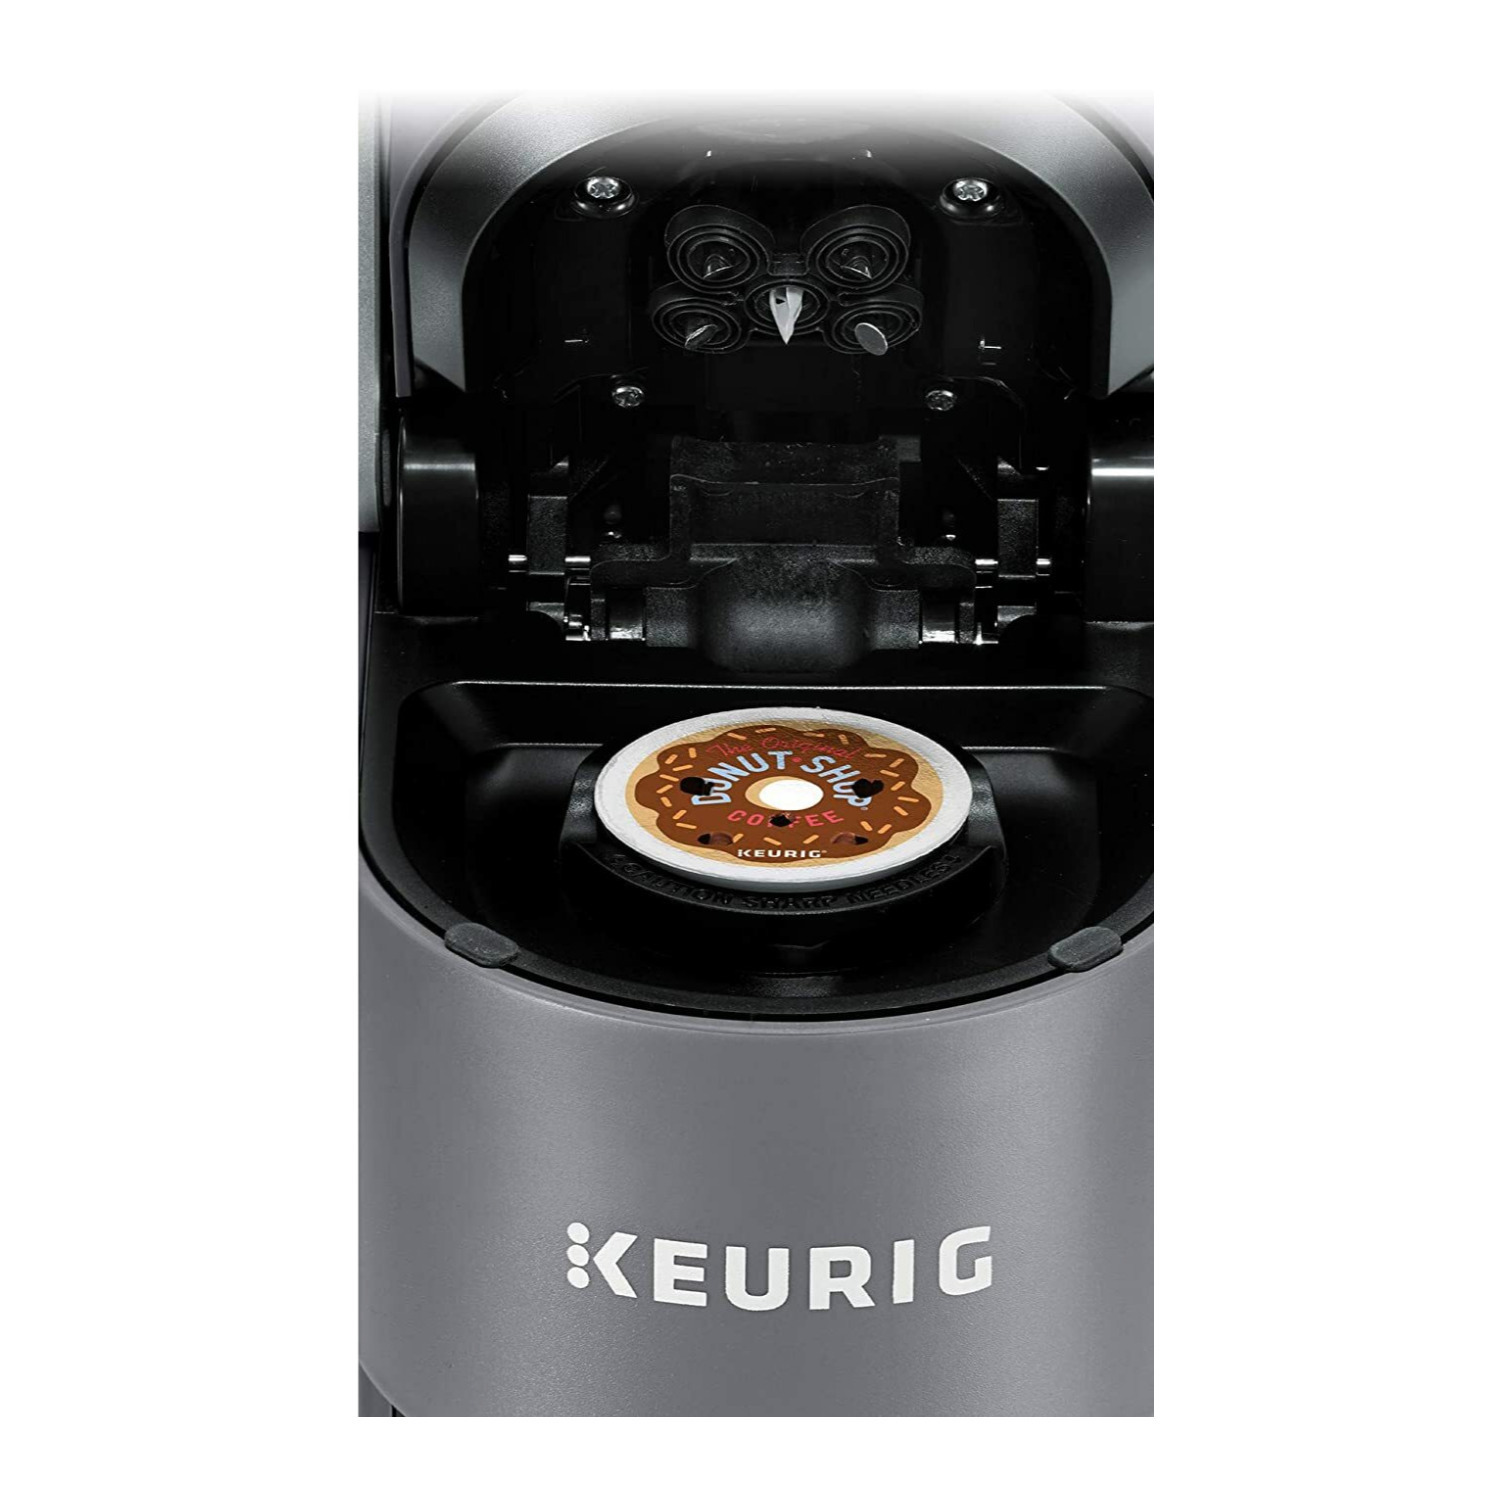 Keurig K-Supreme Single Serve Coffee Maker with Descaling Powder and K-Cup